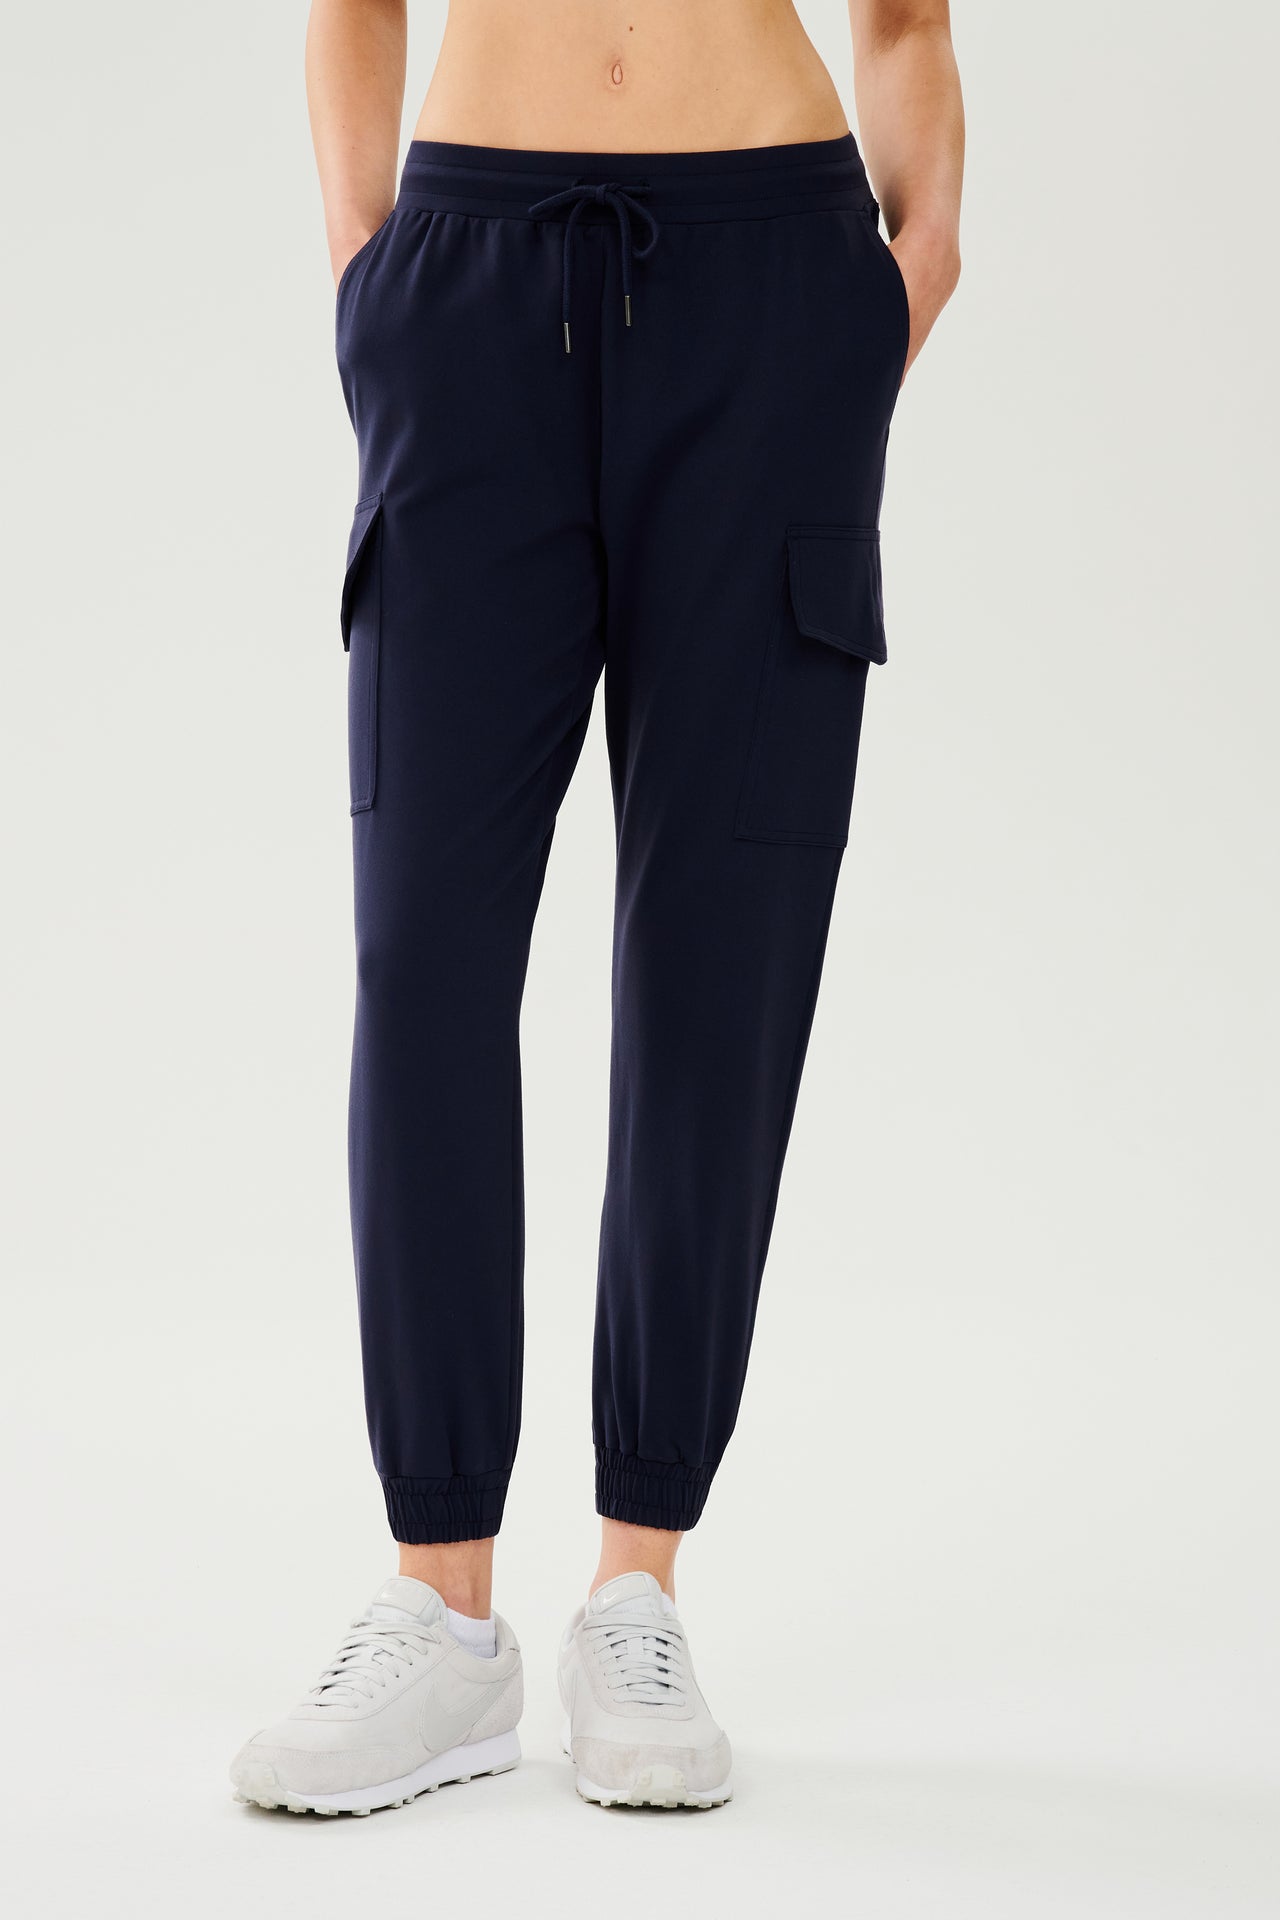 Front view of dark blue cargo pants with white shoes